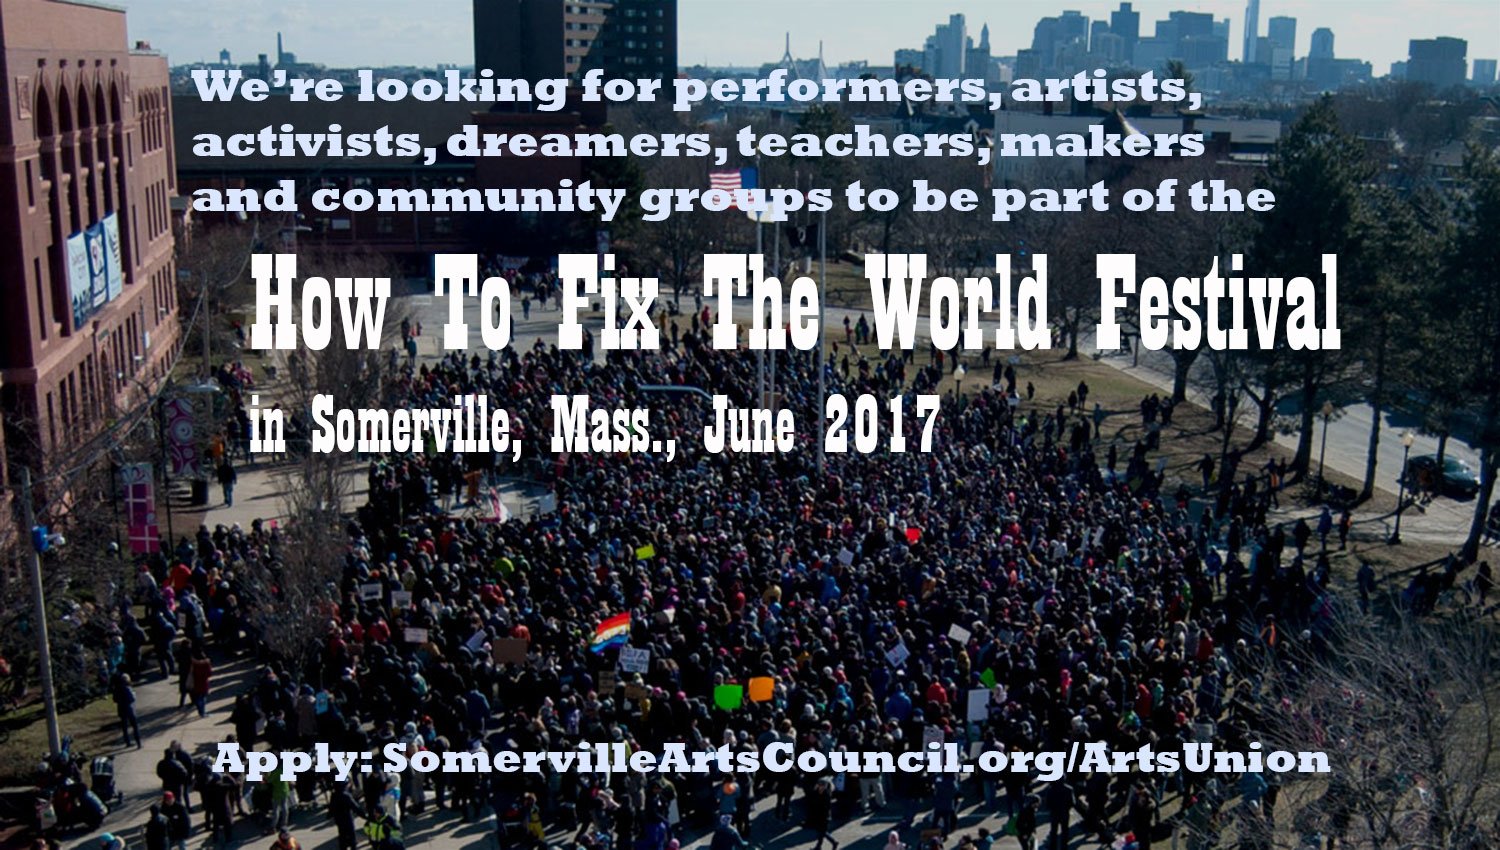 Be part of the "How To Fix The World Festival."